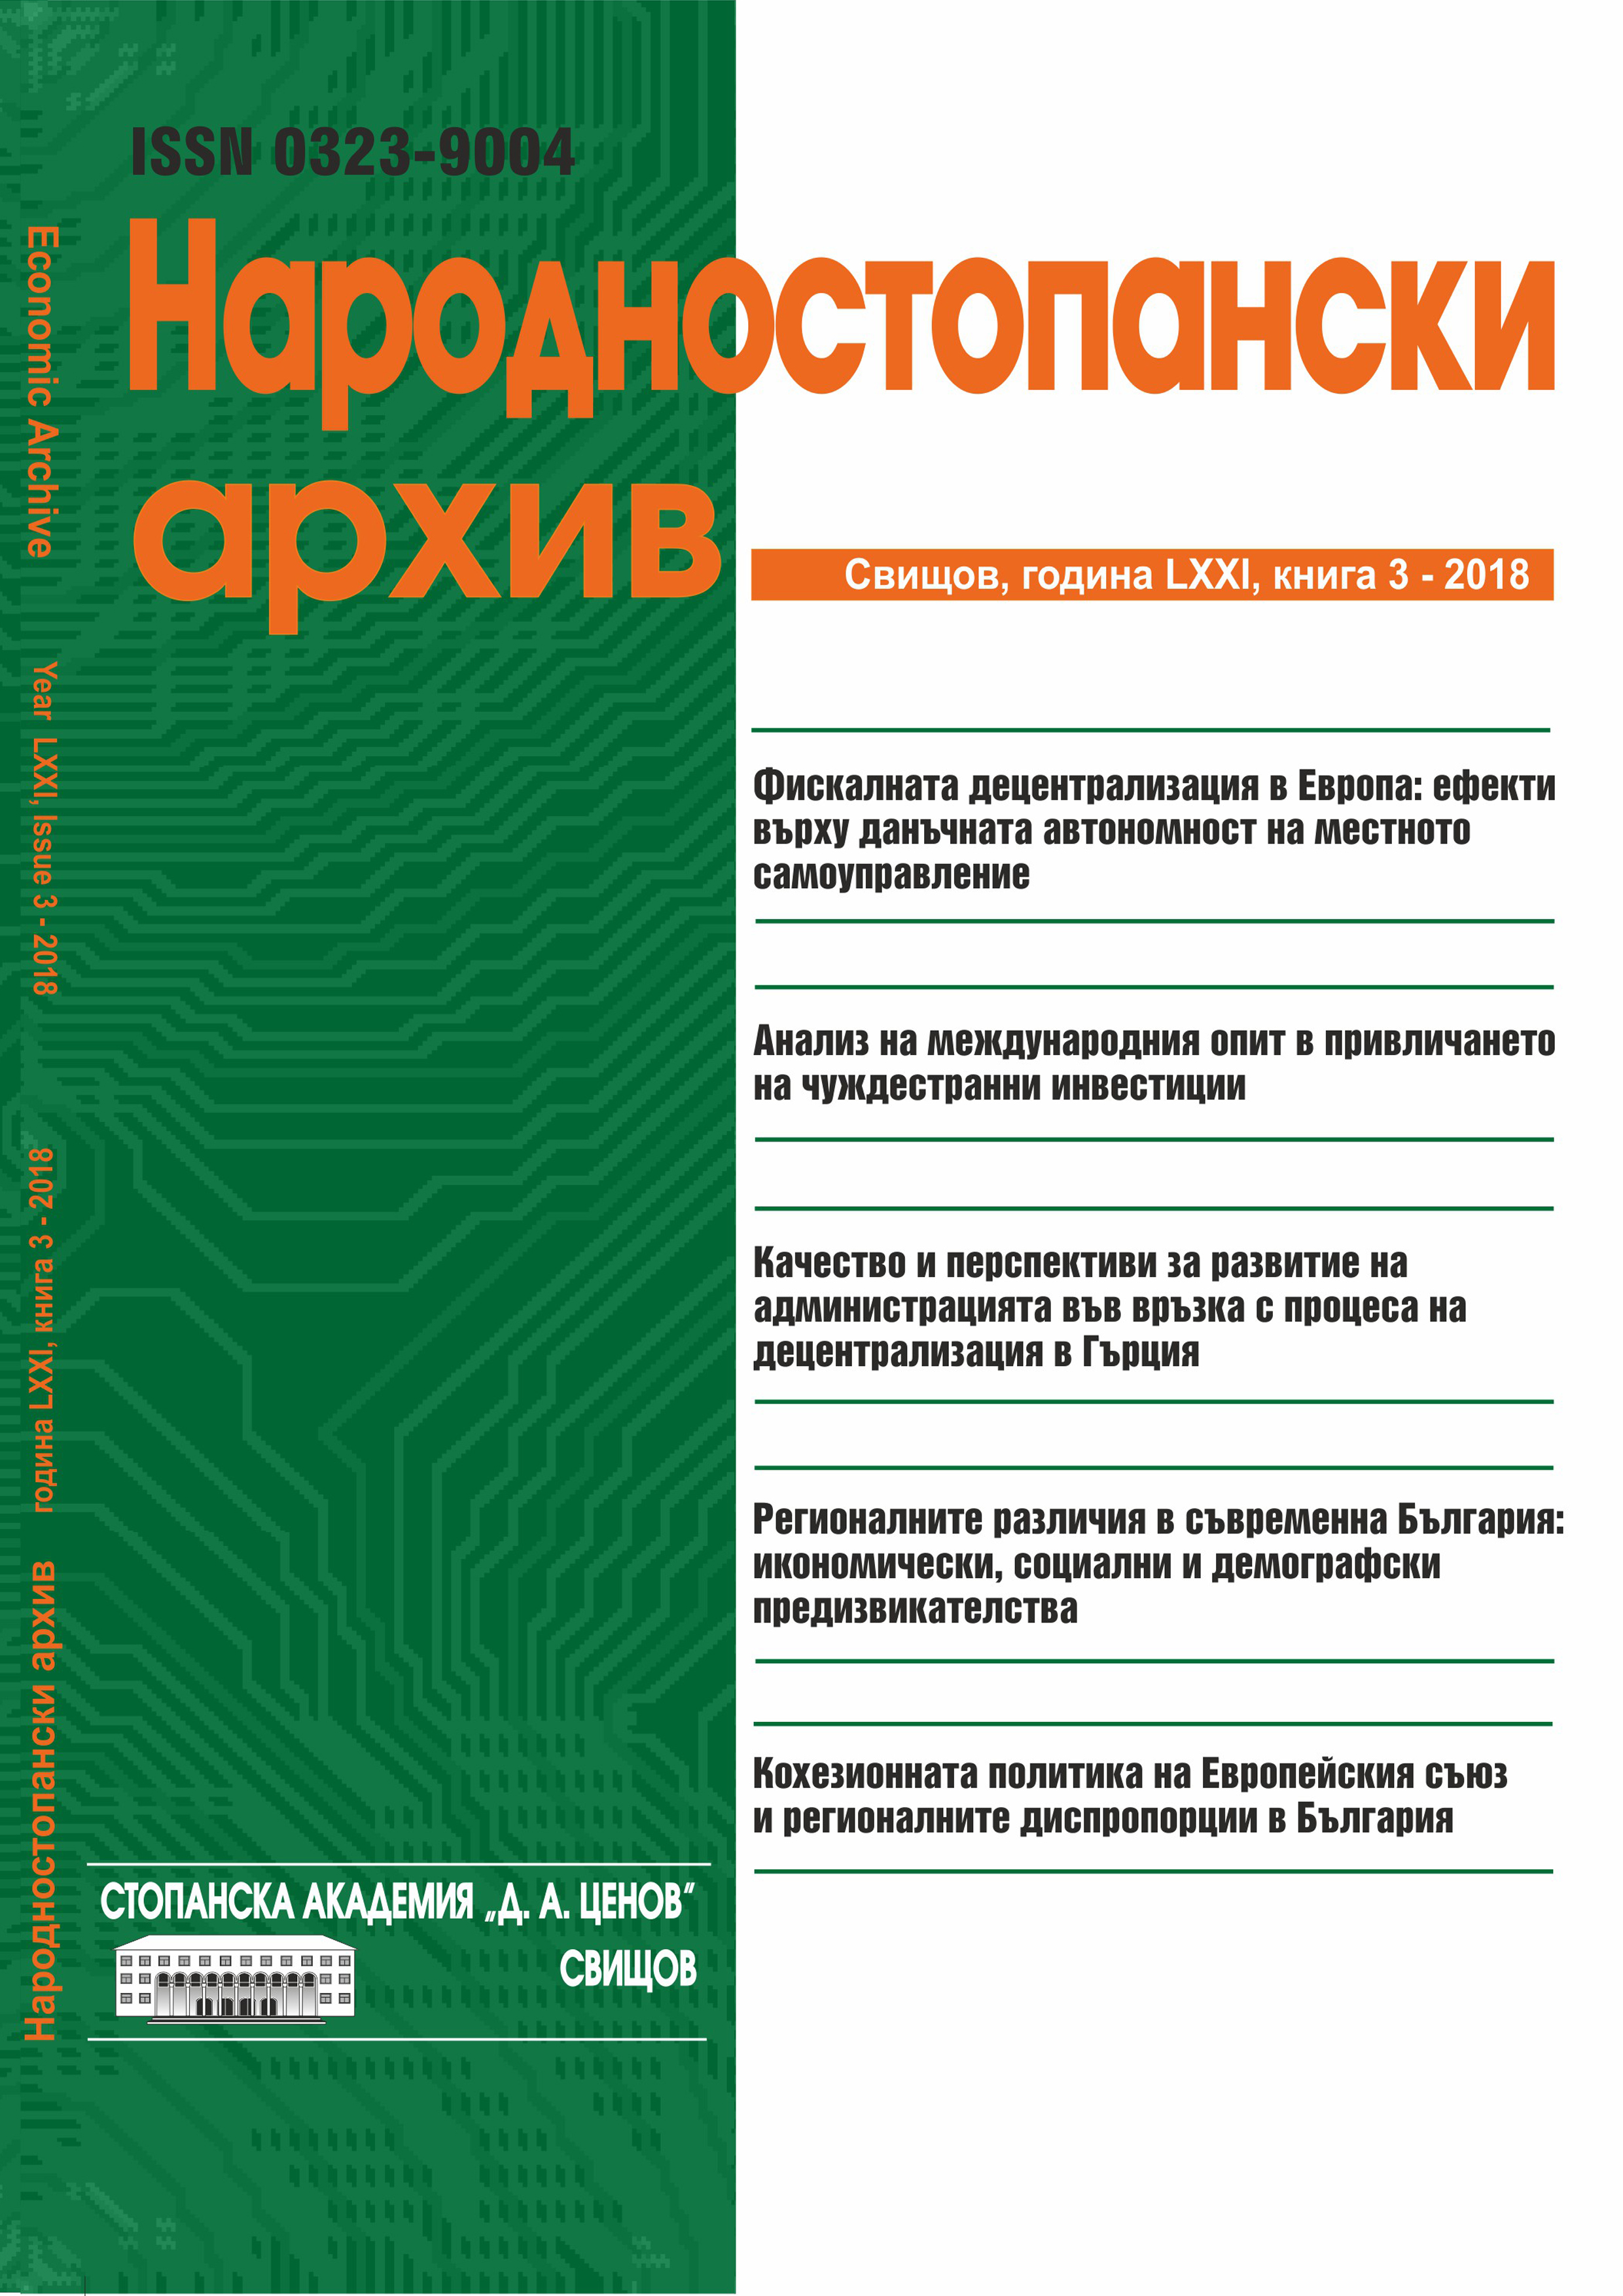 REGIONAL DISPARITIES IN BULGARIA TODAY: ECONOMIC, SOCIAL, AND DEMOGRAPHIC CHALLENGESREGIONAL DISPARITIES IN BULGARIA TODAY: ECONOMIC, SOCIAL, AND DEMOGRAPHIC CHALLENGES Cover Image